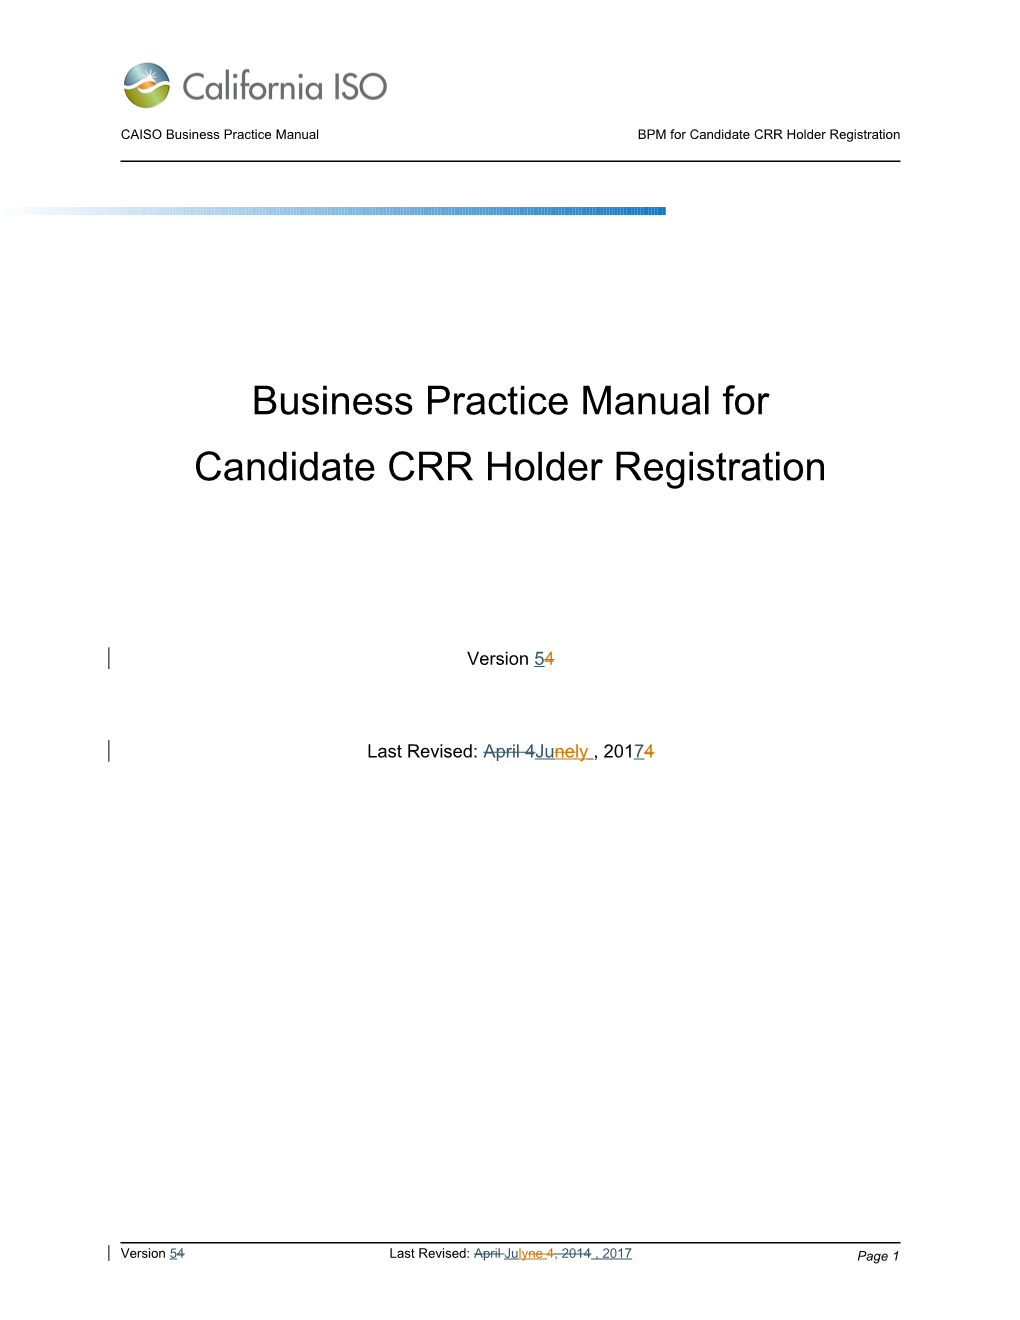 CAISO Business Practice Manualbpm for Candidate CRR Holder Registration